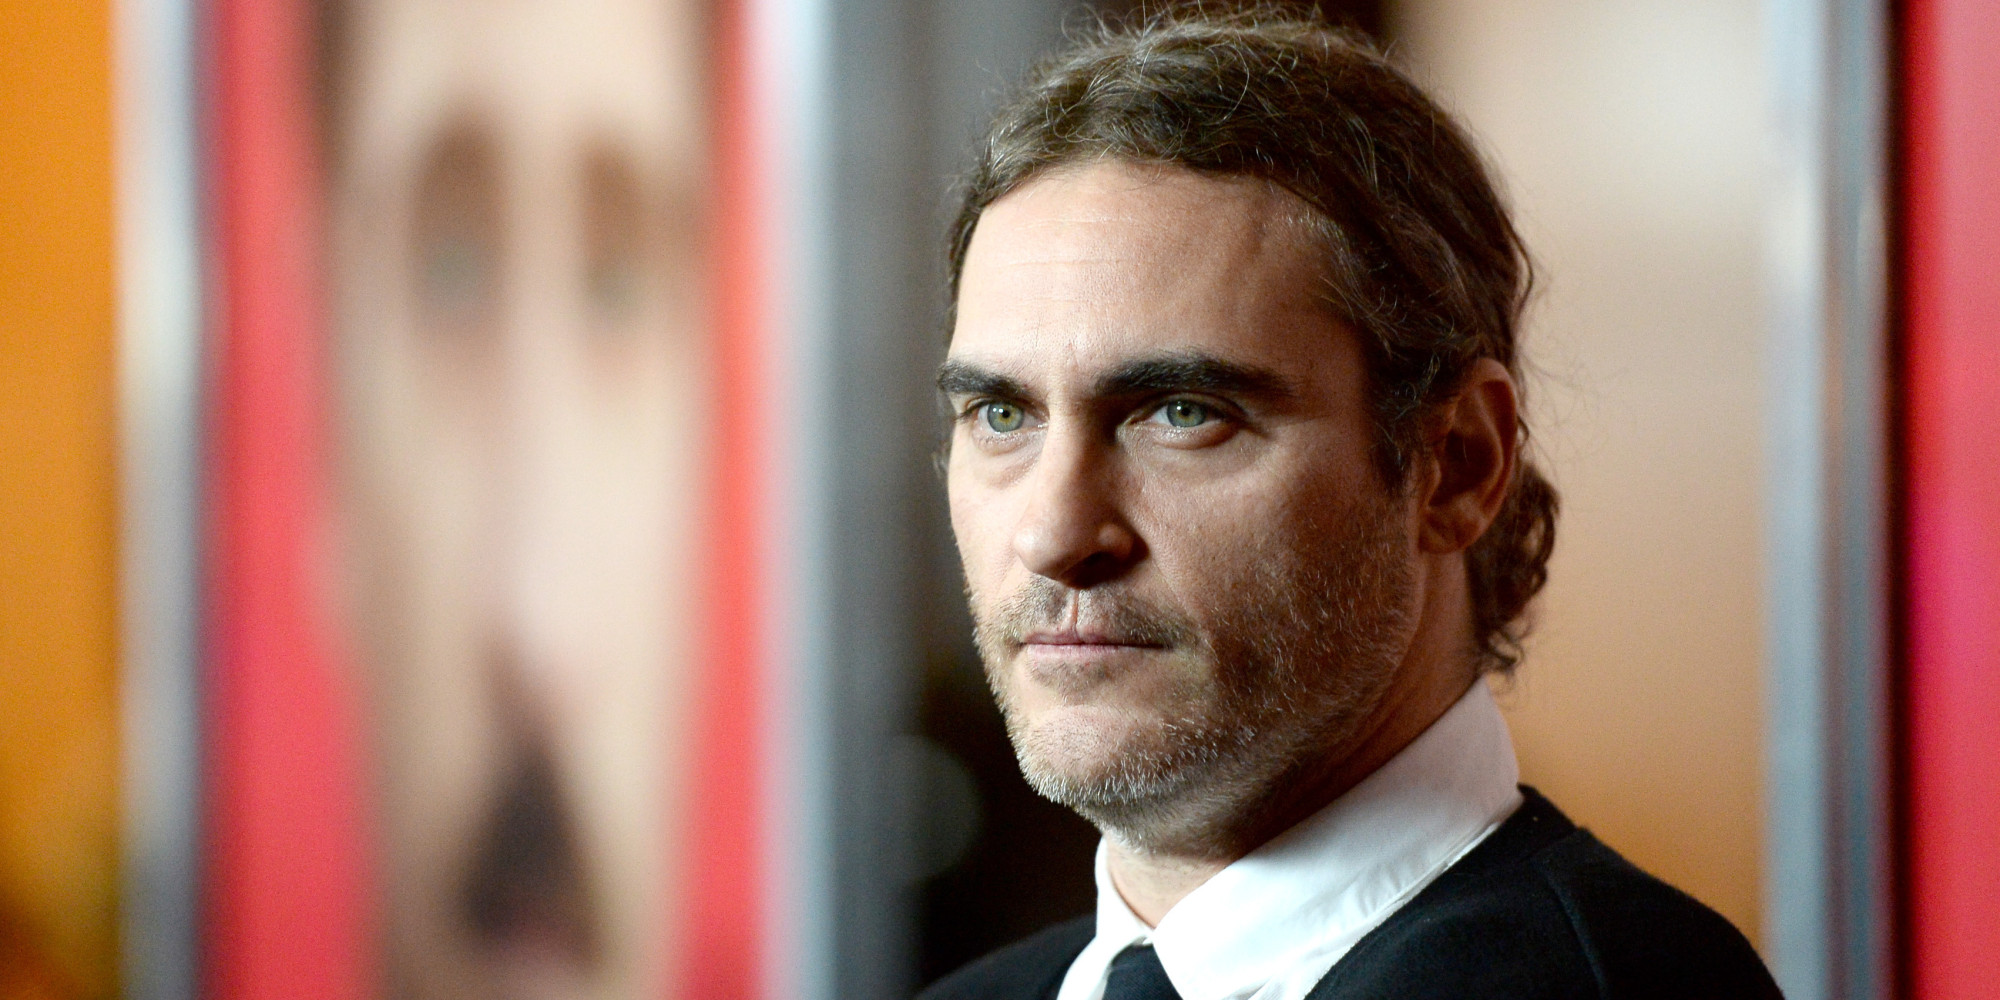 Go Ahead, Stare At Joaquin Phoenix's Forehead. Yup, You See It Now. | HuffPost2000 x 1000